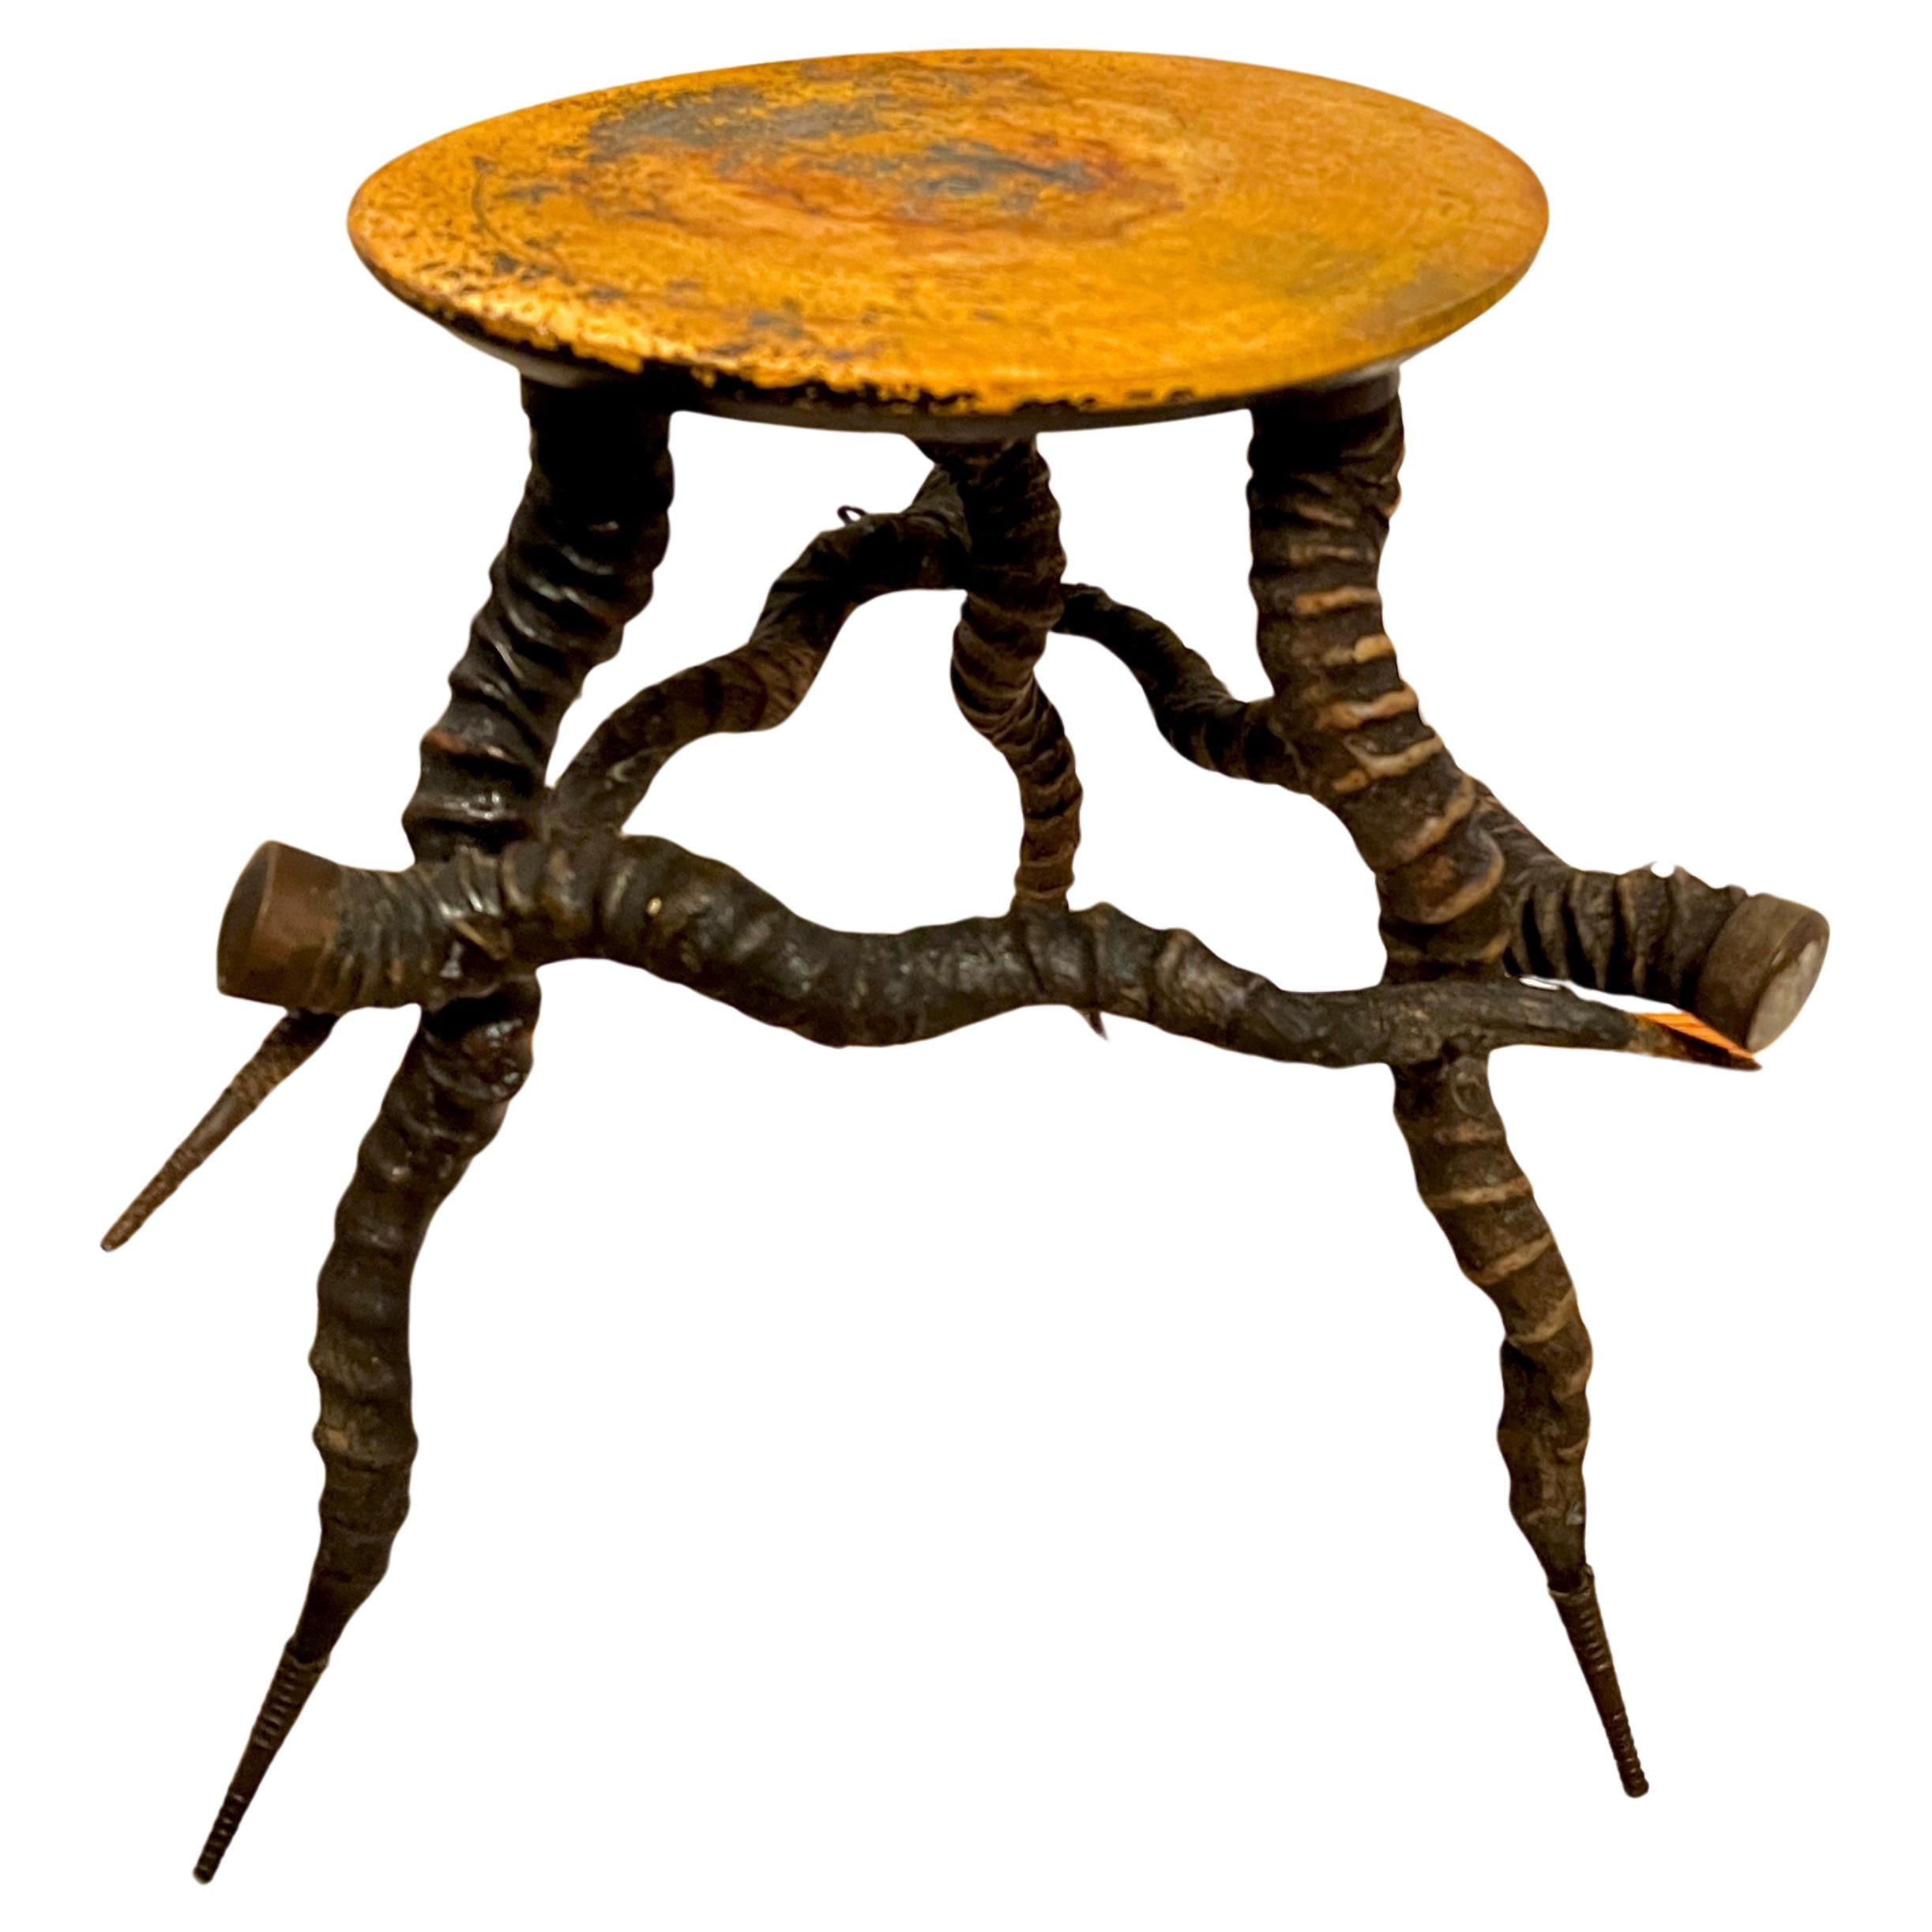 African Kudu Horn or Antler Side Table with Brass Fittings